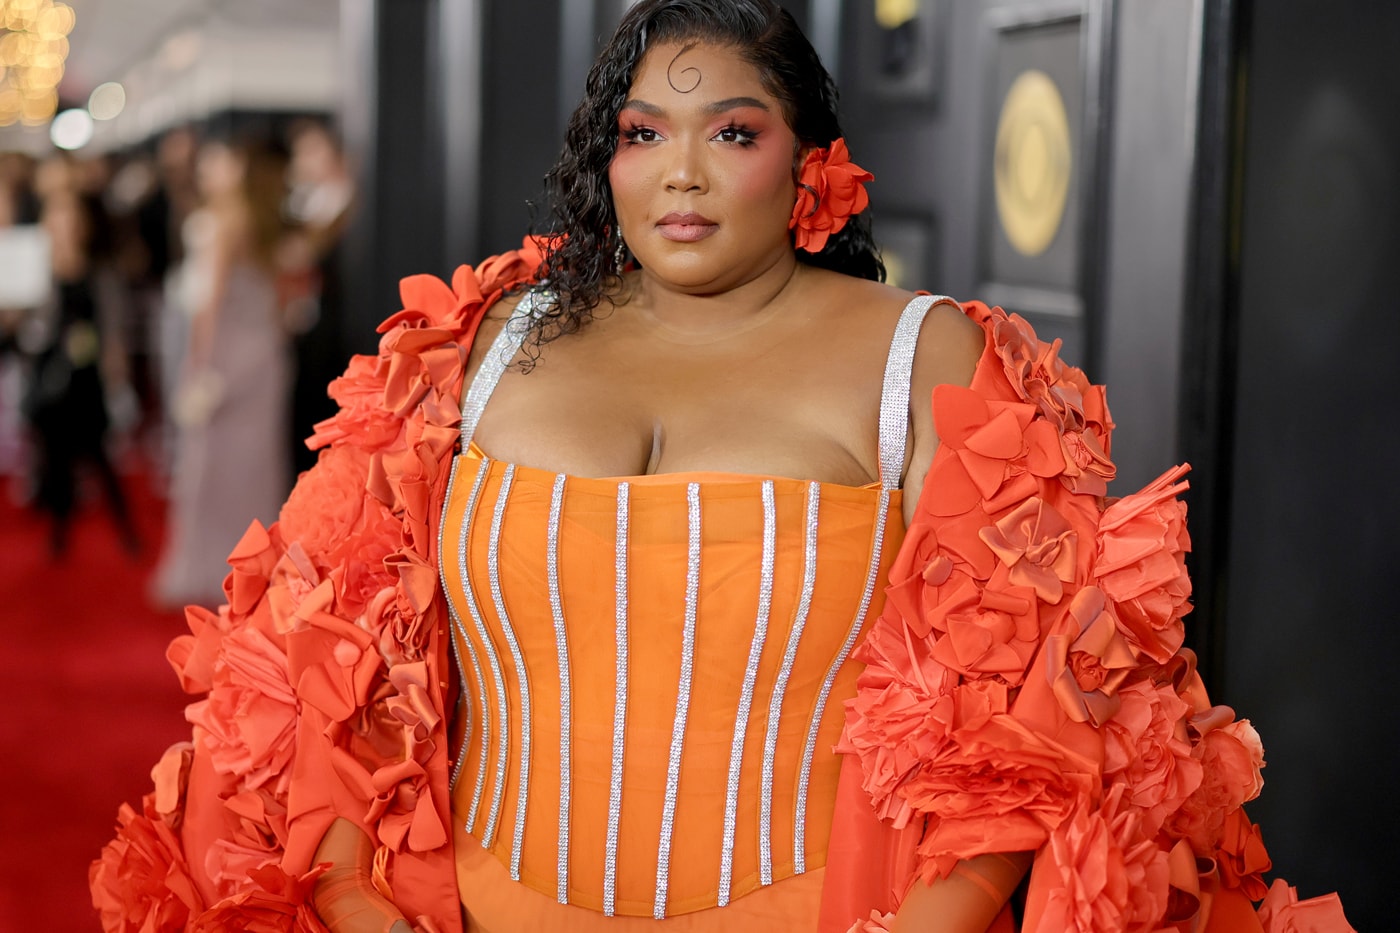 Lizzo Granted 100 percent That Bitch Trademark truth hurts